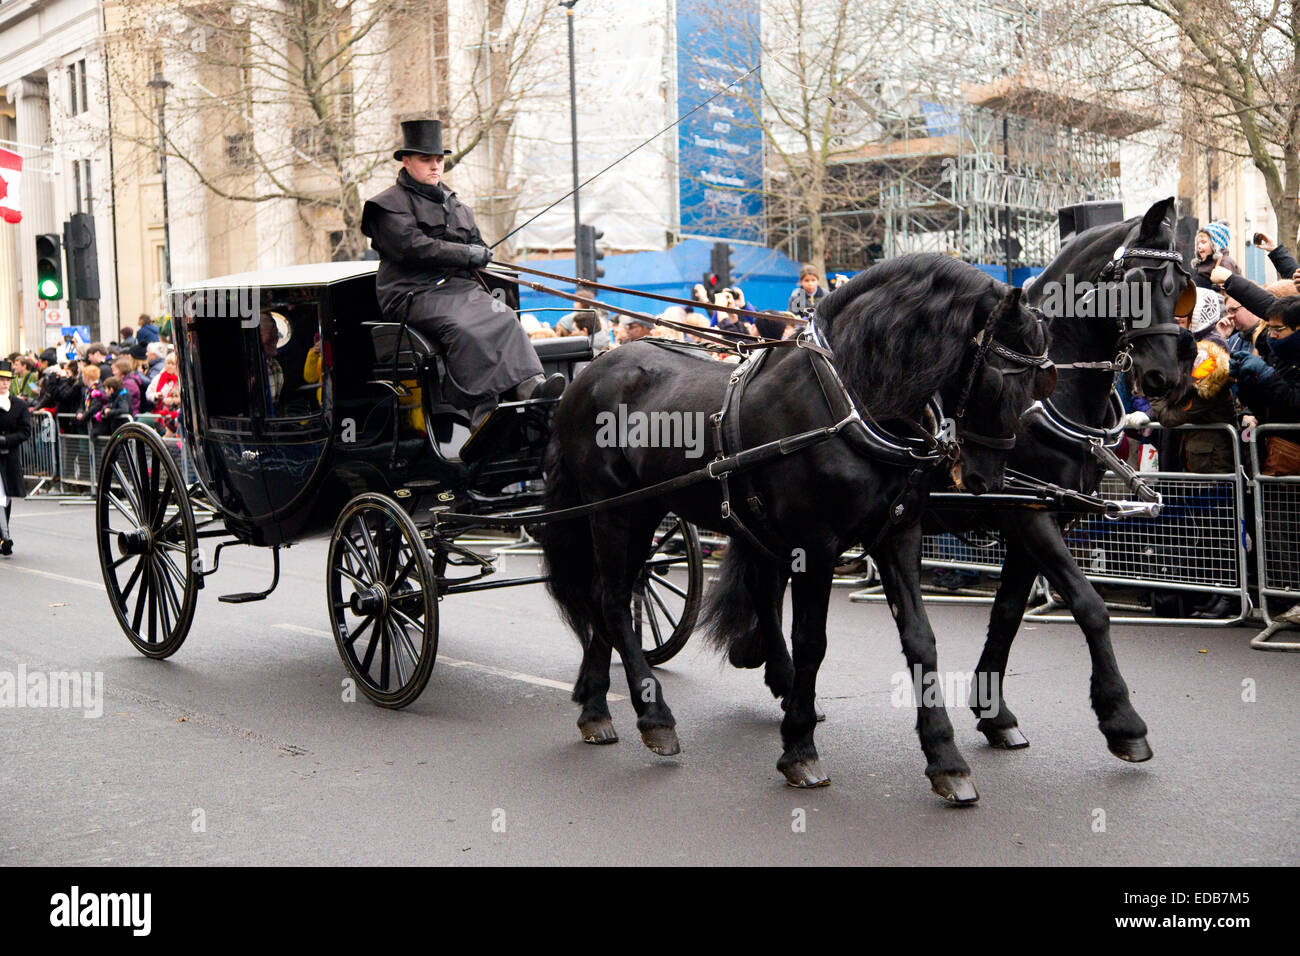 New Years Day Parade, Londres, 2015 Banque D'Images